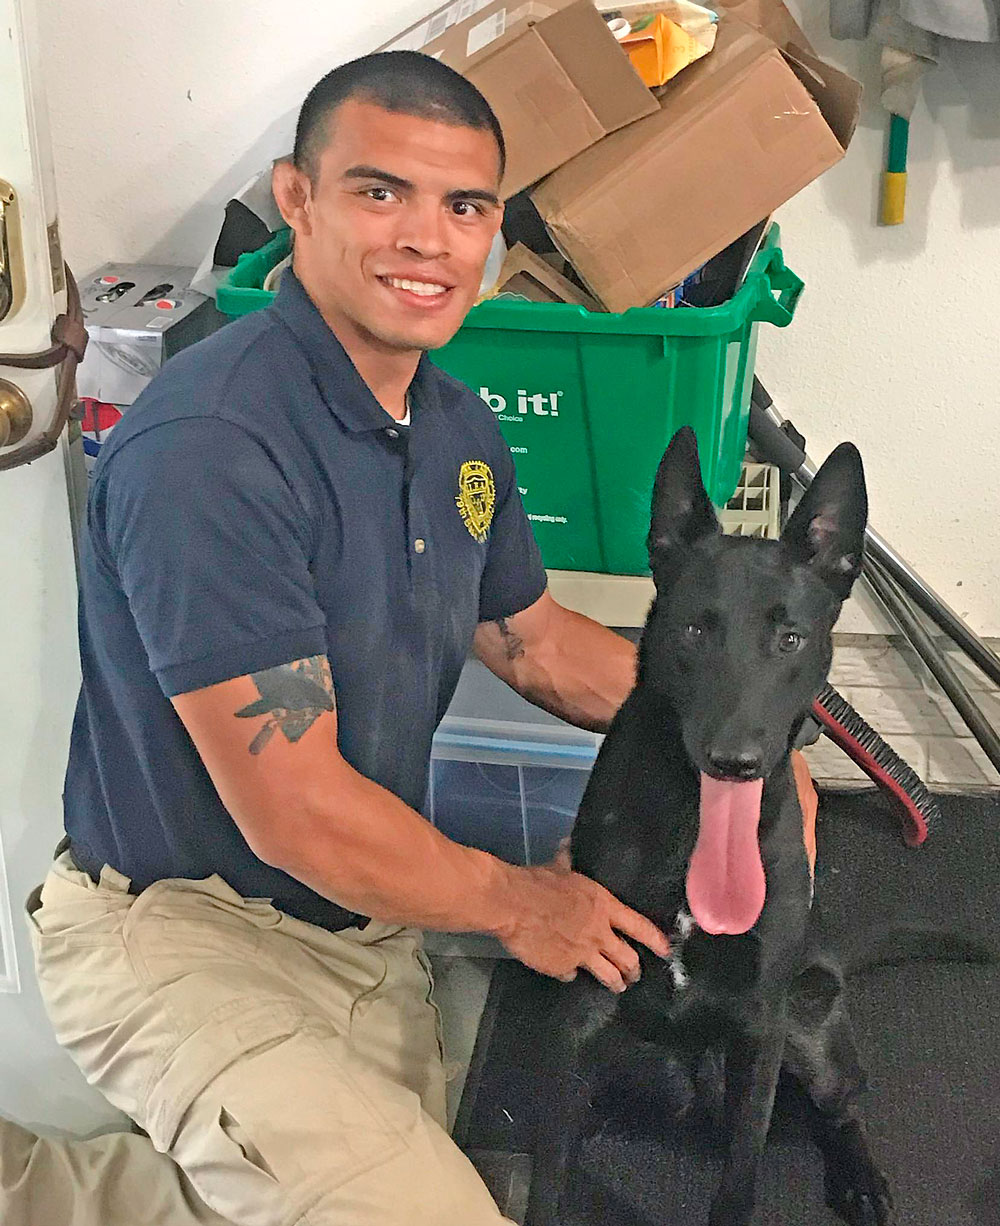 K-9 Jordy receives equipment grant for added protection